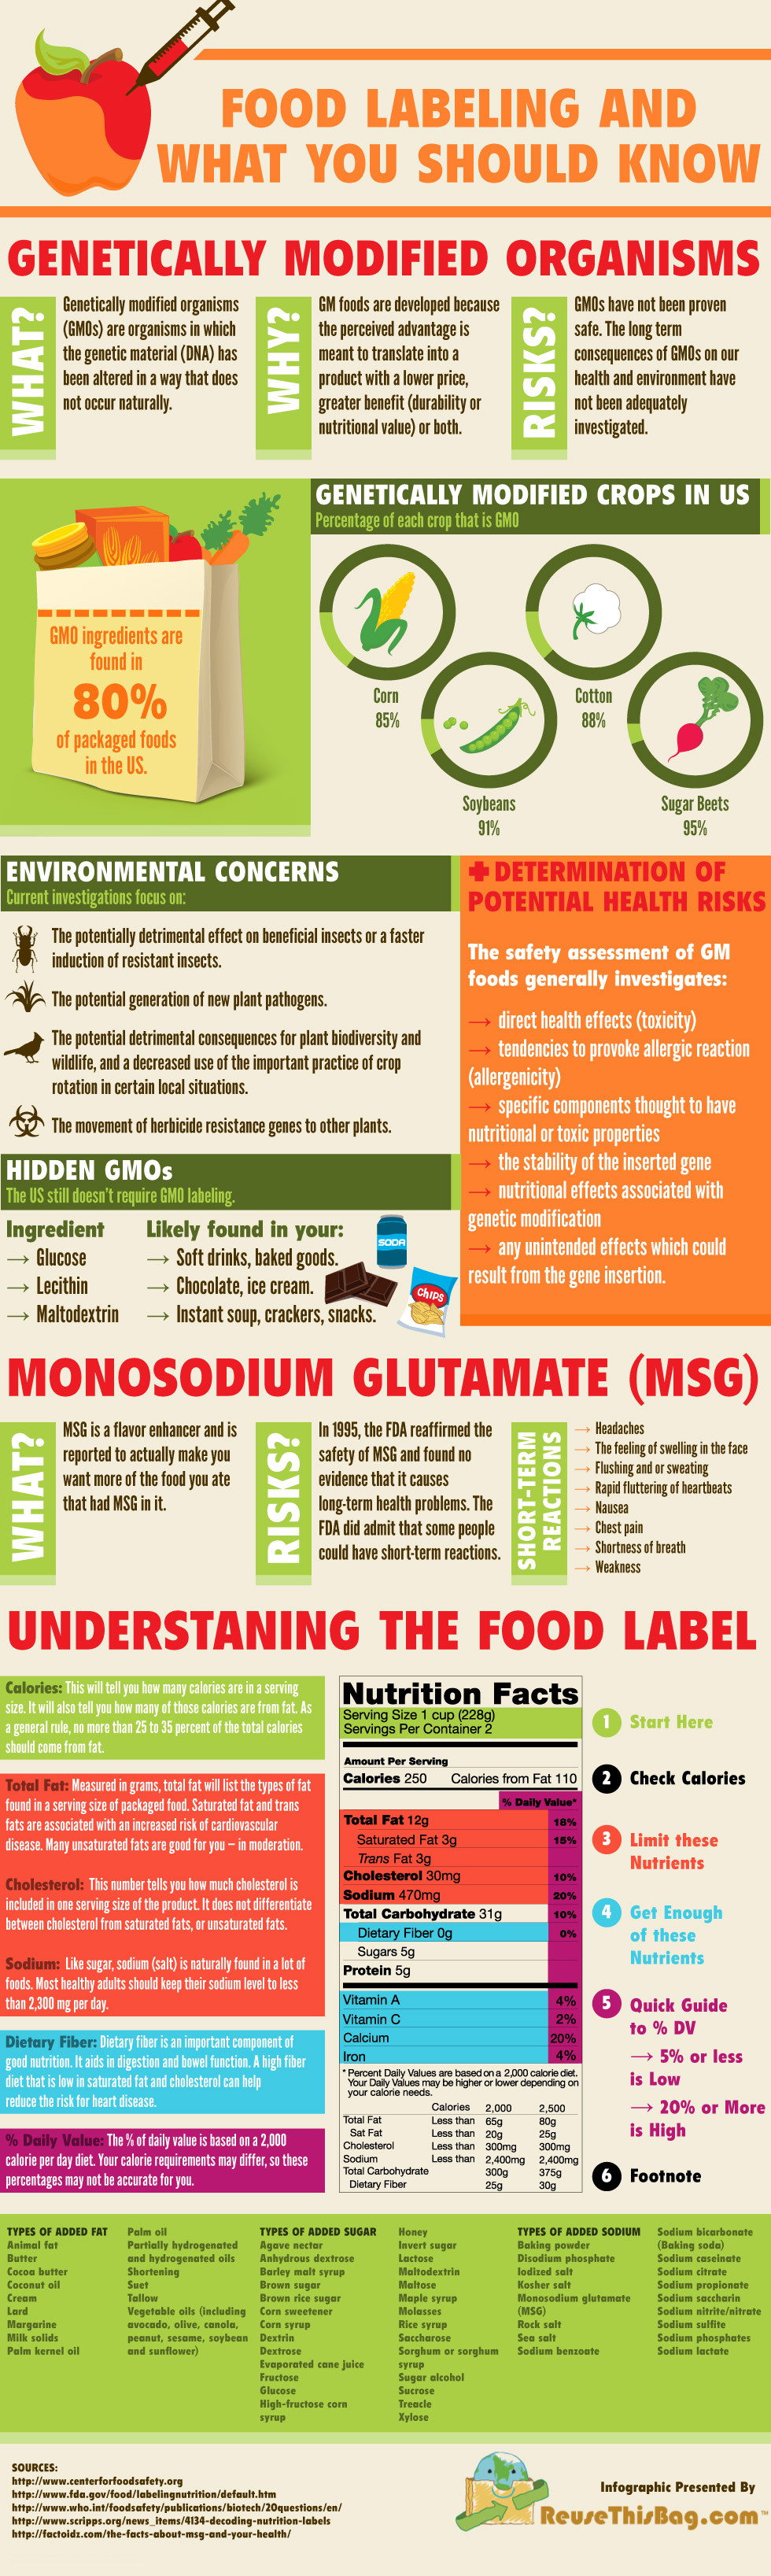 What You Should Know About Food Labeling